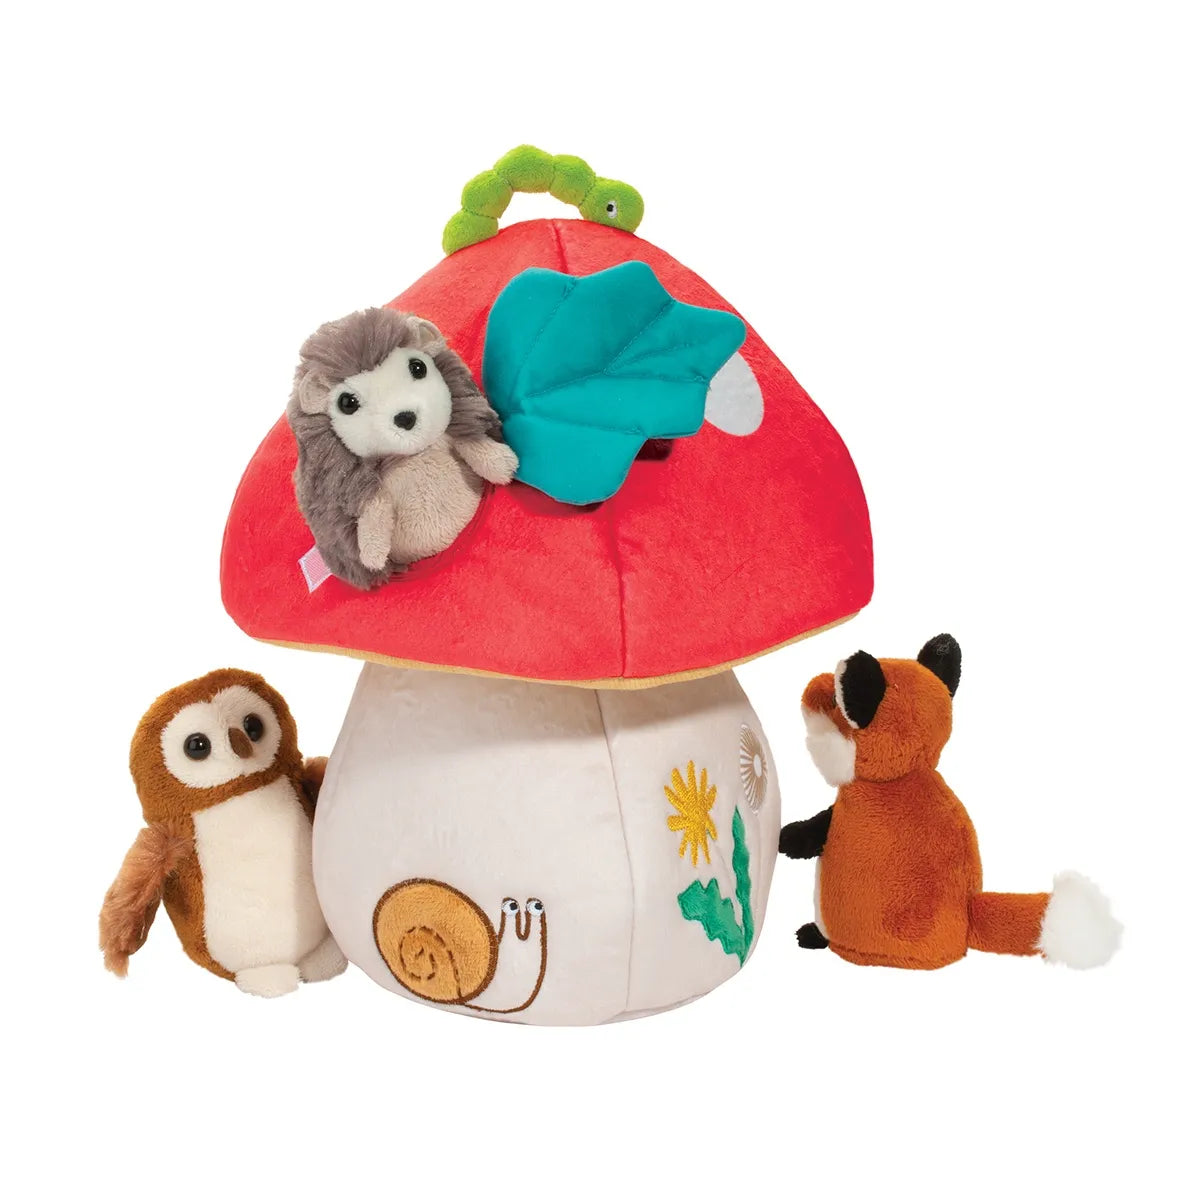 Woodland Mushroom Play Set With Finger Puppets